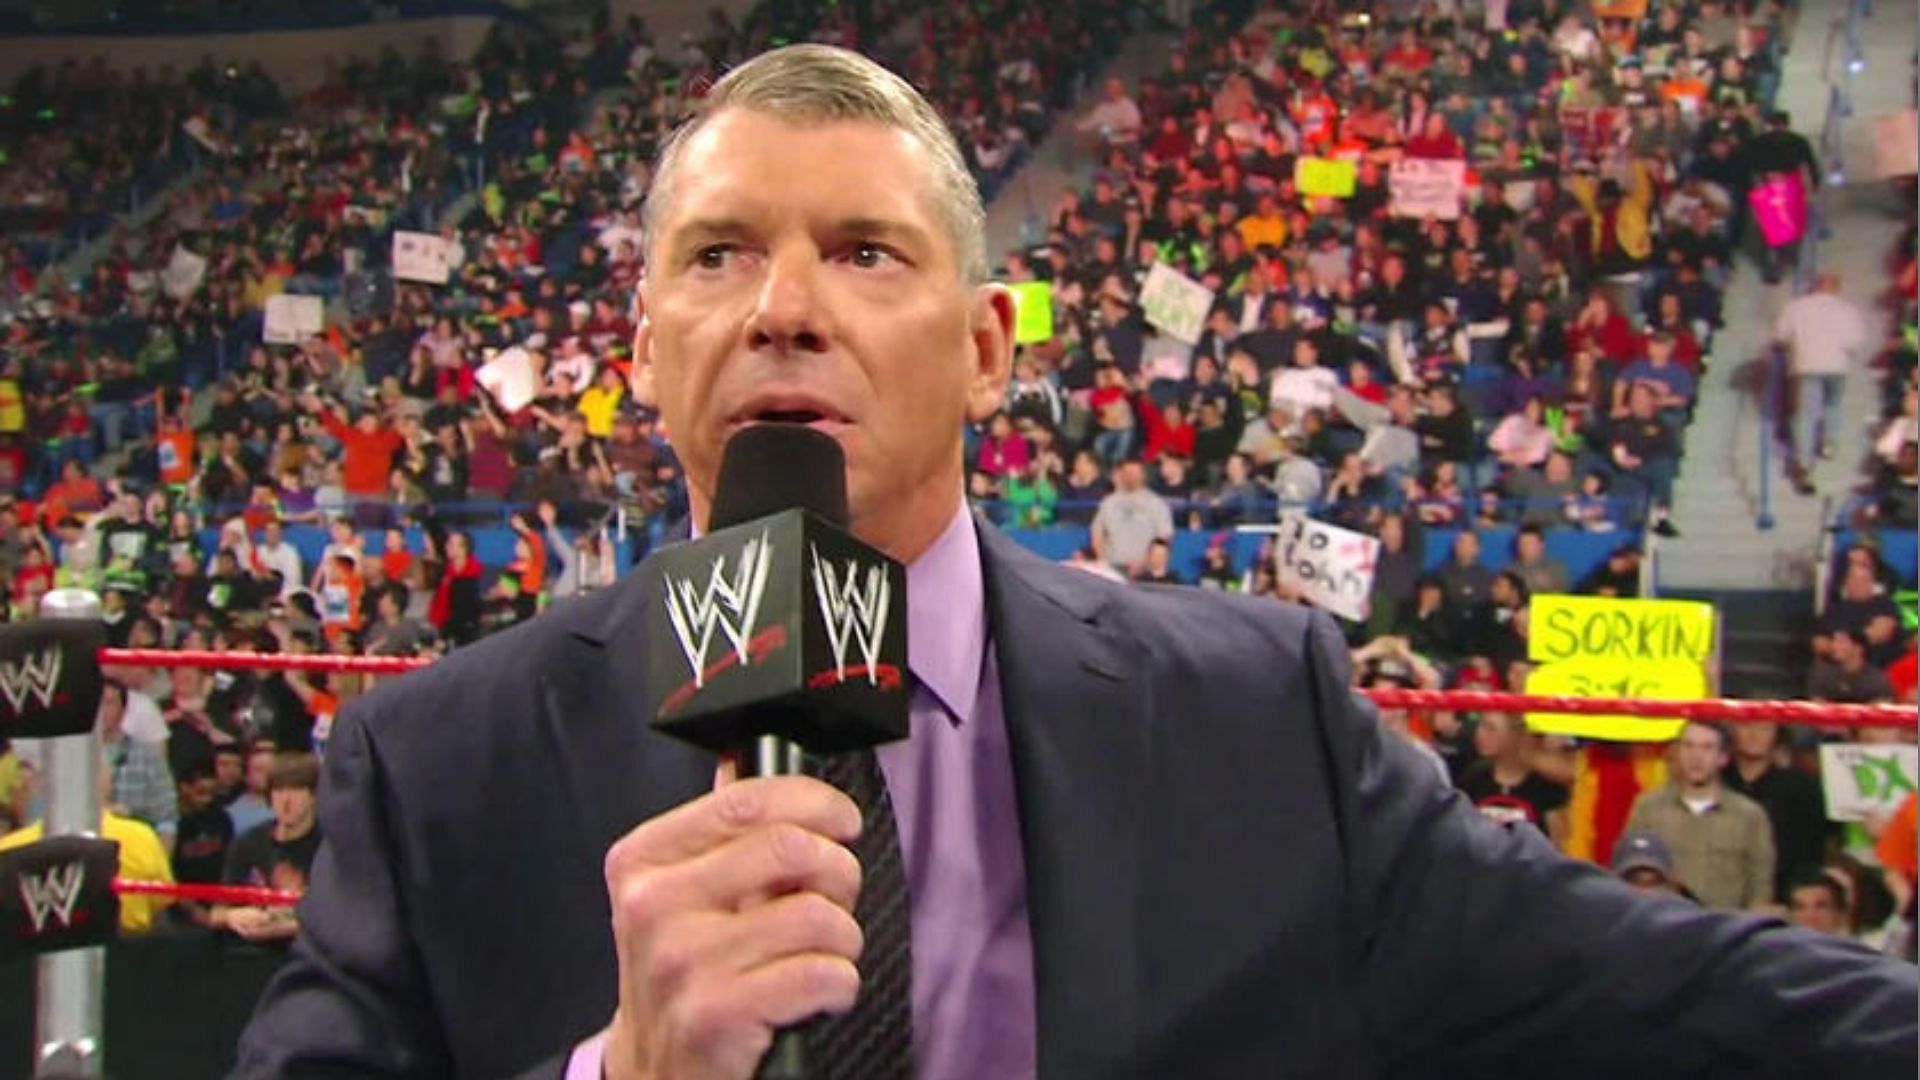 Vince McMahon is no longer a part of the WWE TKO board